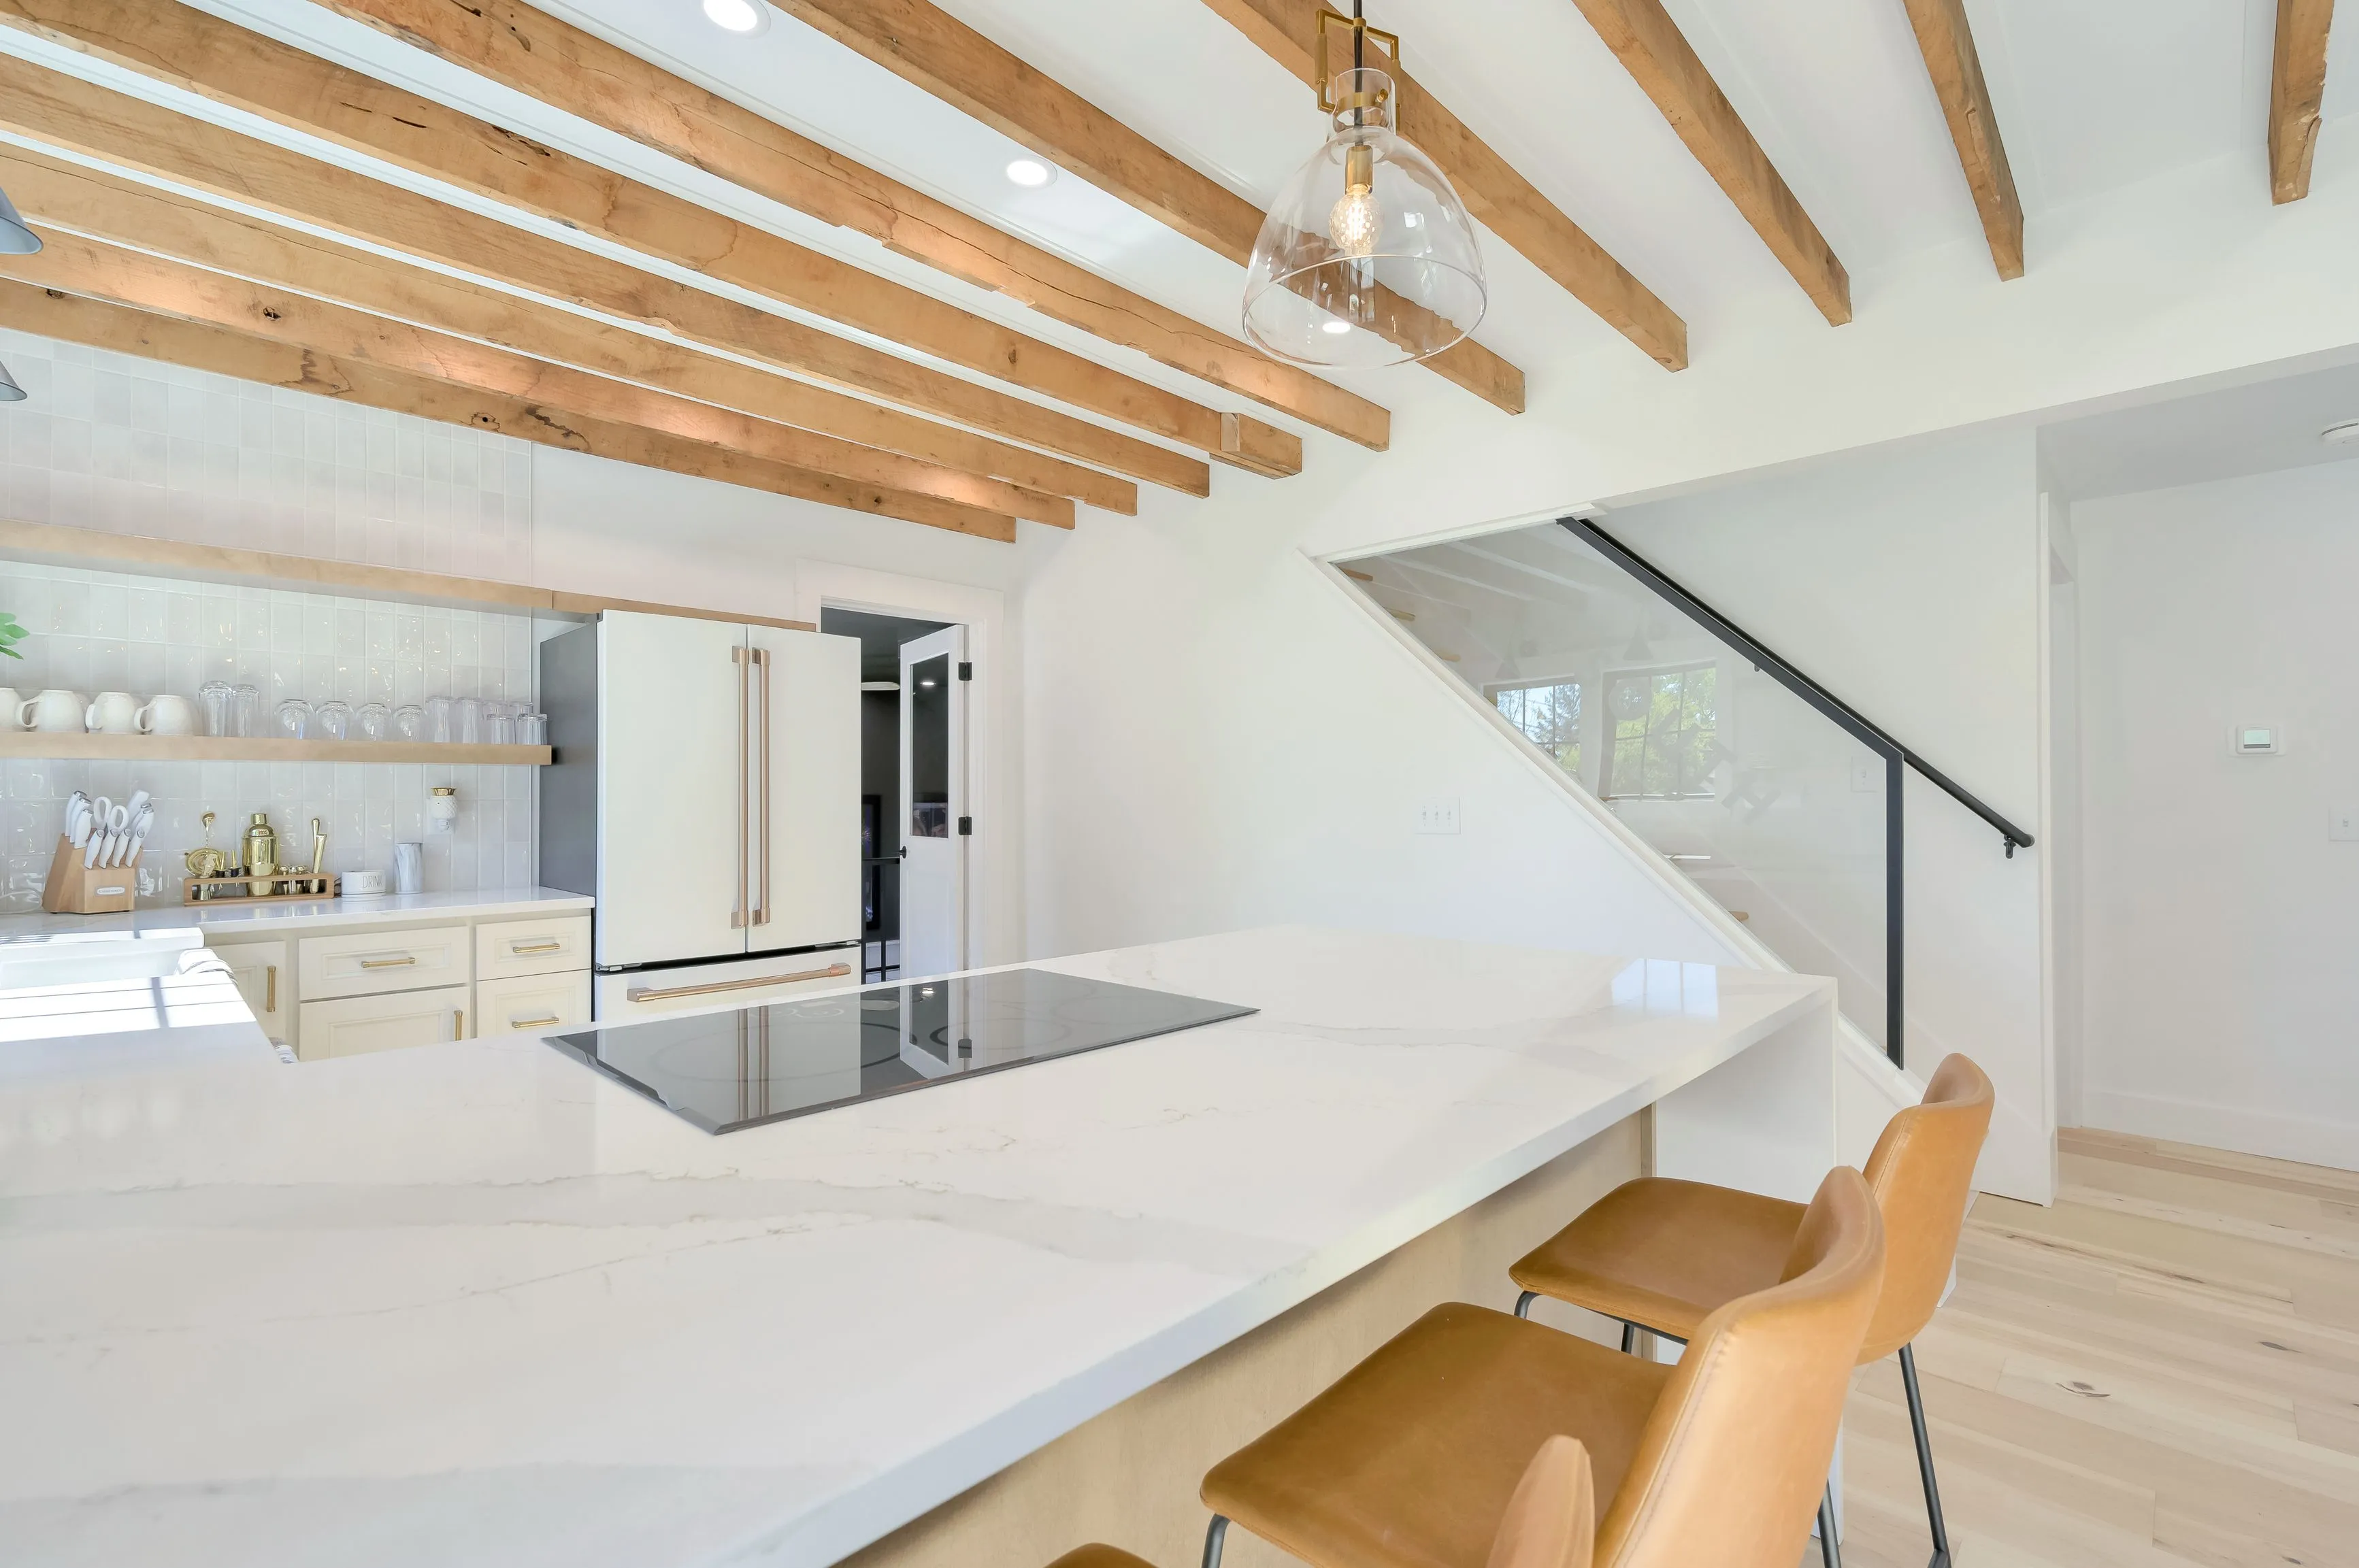 Modern kitchen interior with a large central island, wooden beams on the ceiling, and minimalist design.